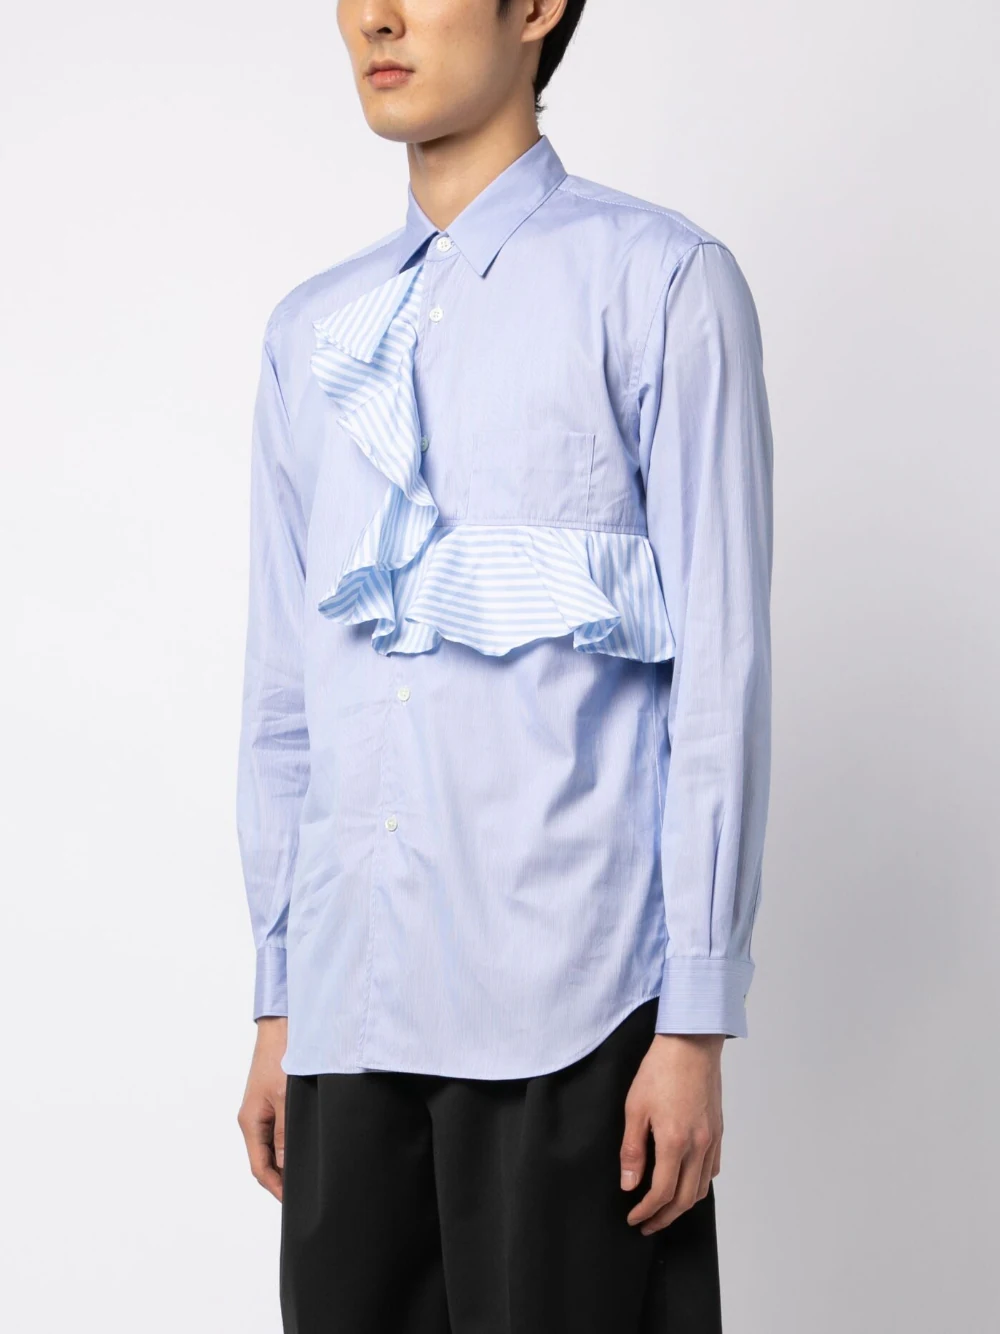 comme des garcons 14aw ruffled shirts